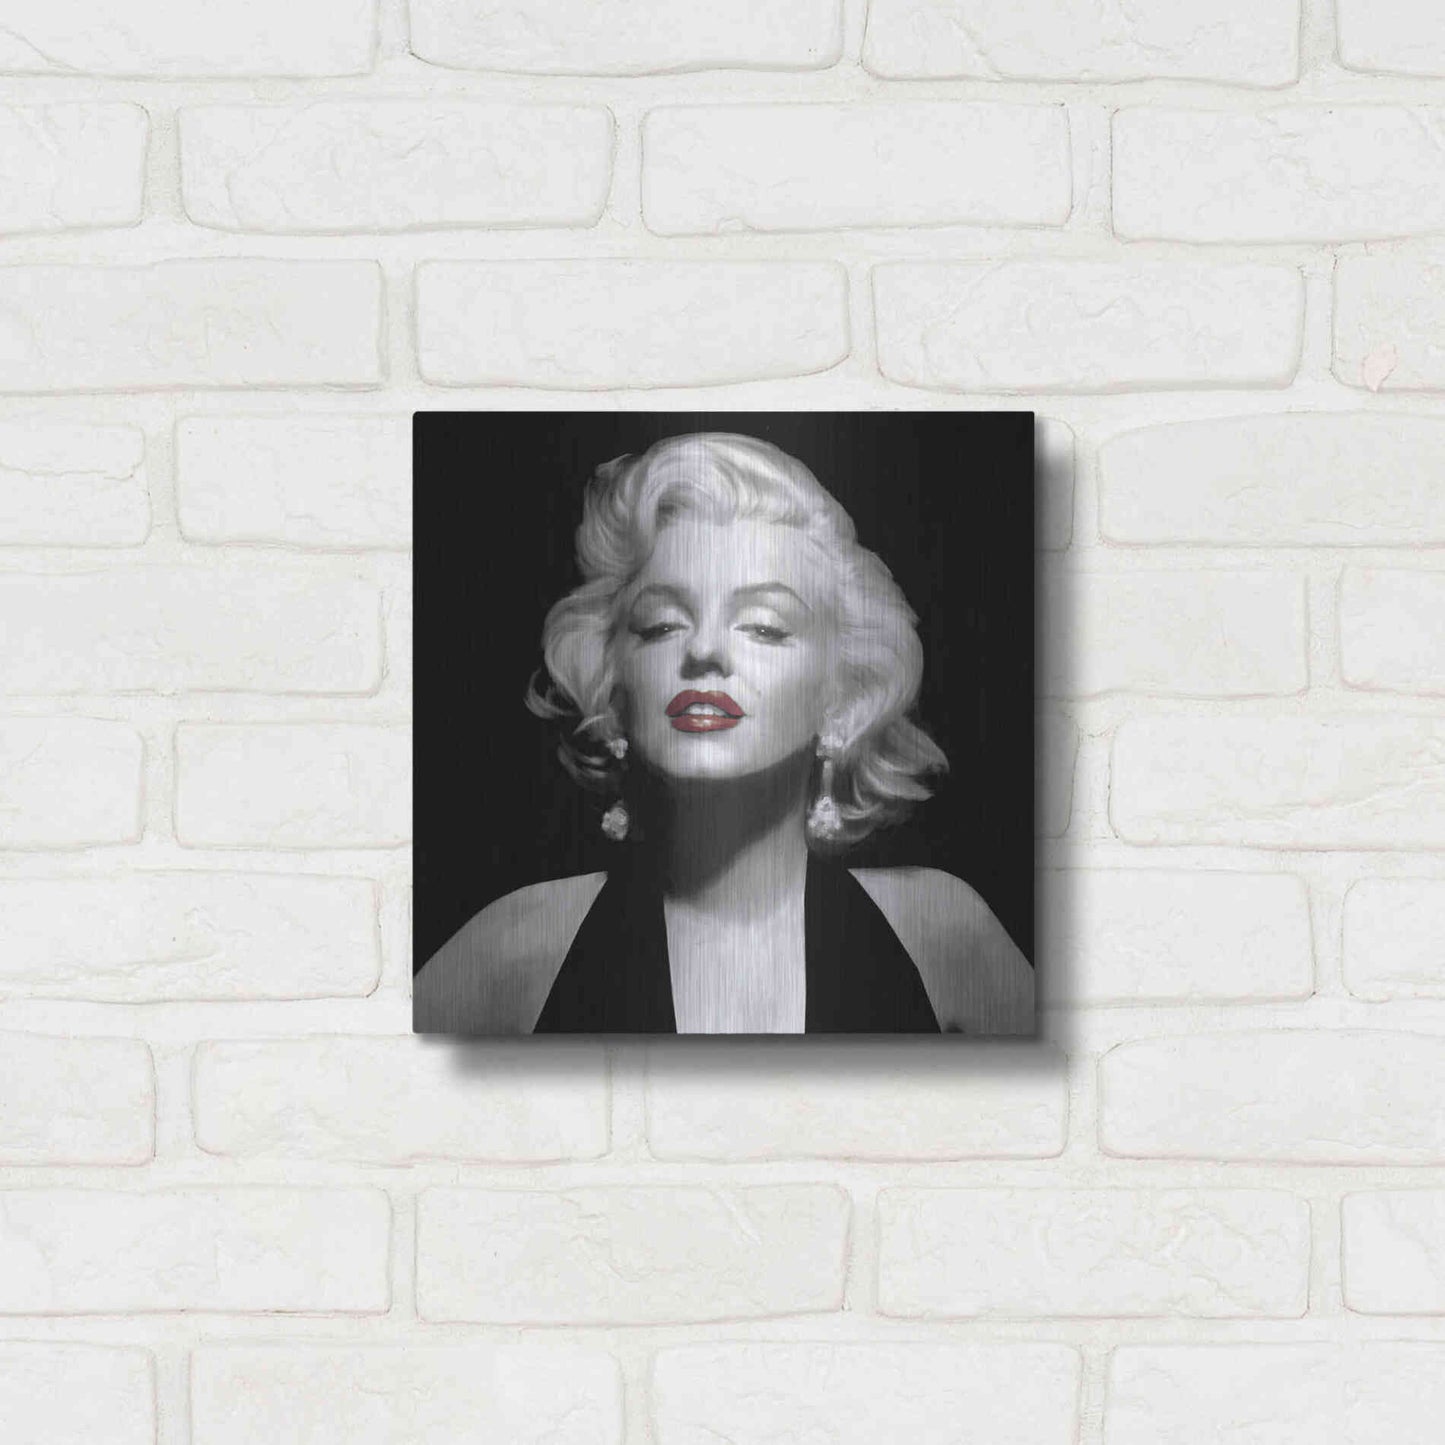 Luxe Metal Art 'Halter Top Marilyn Red Lips' by Chris Consani, Metal Wall Art,12x12